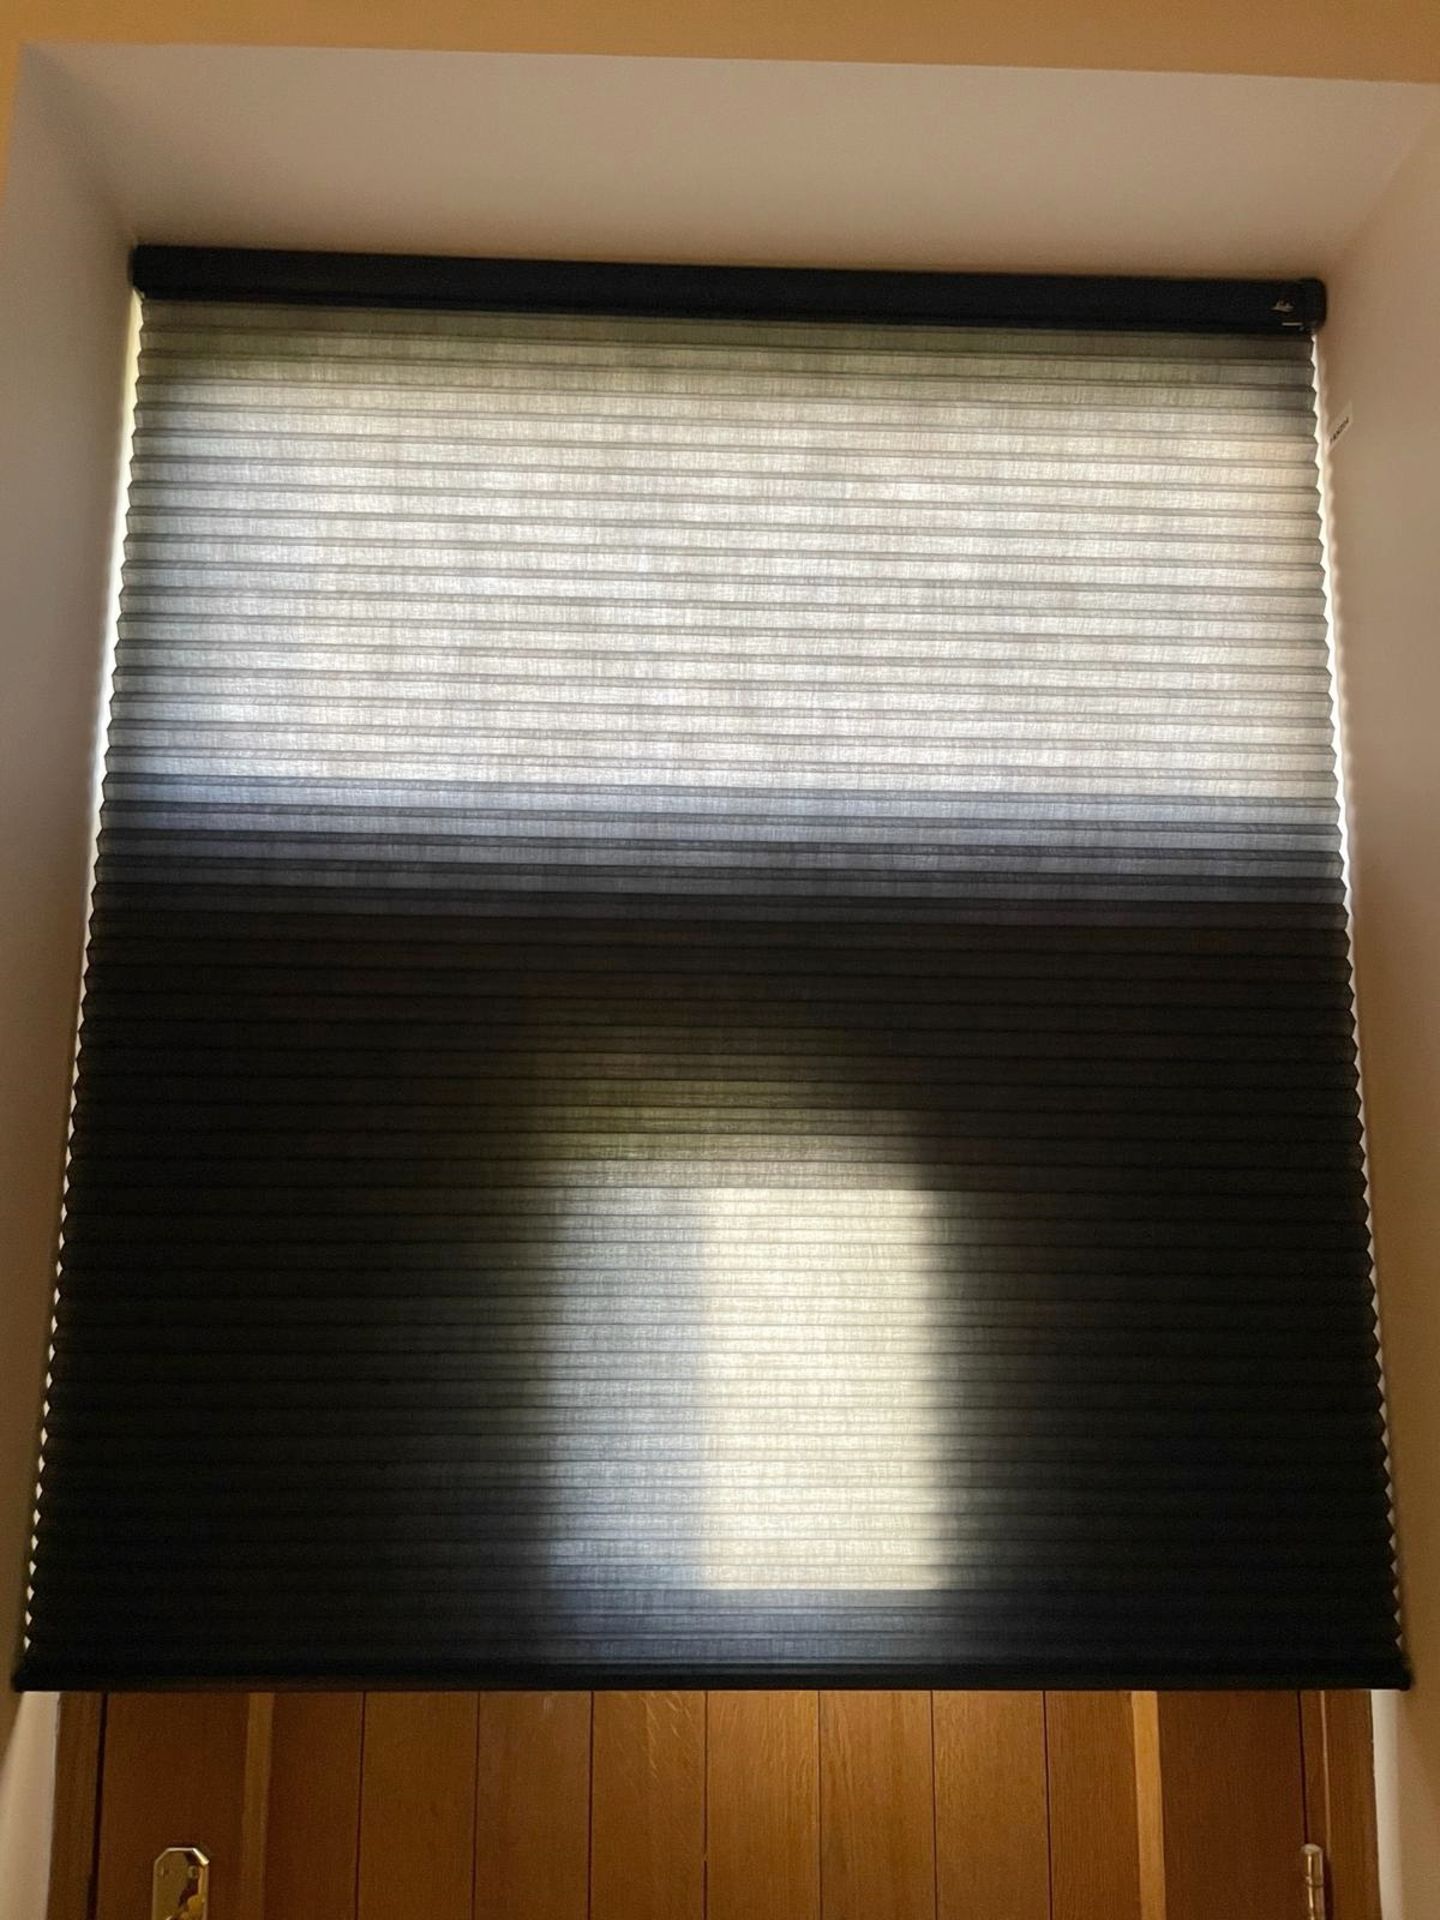 6 x Assorted LUXAFLEX Premium Made-to Measure Window Blinds - Image 3 of 7